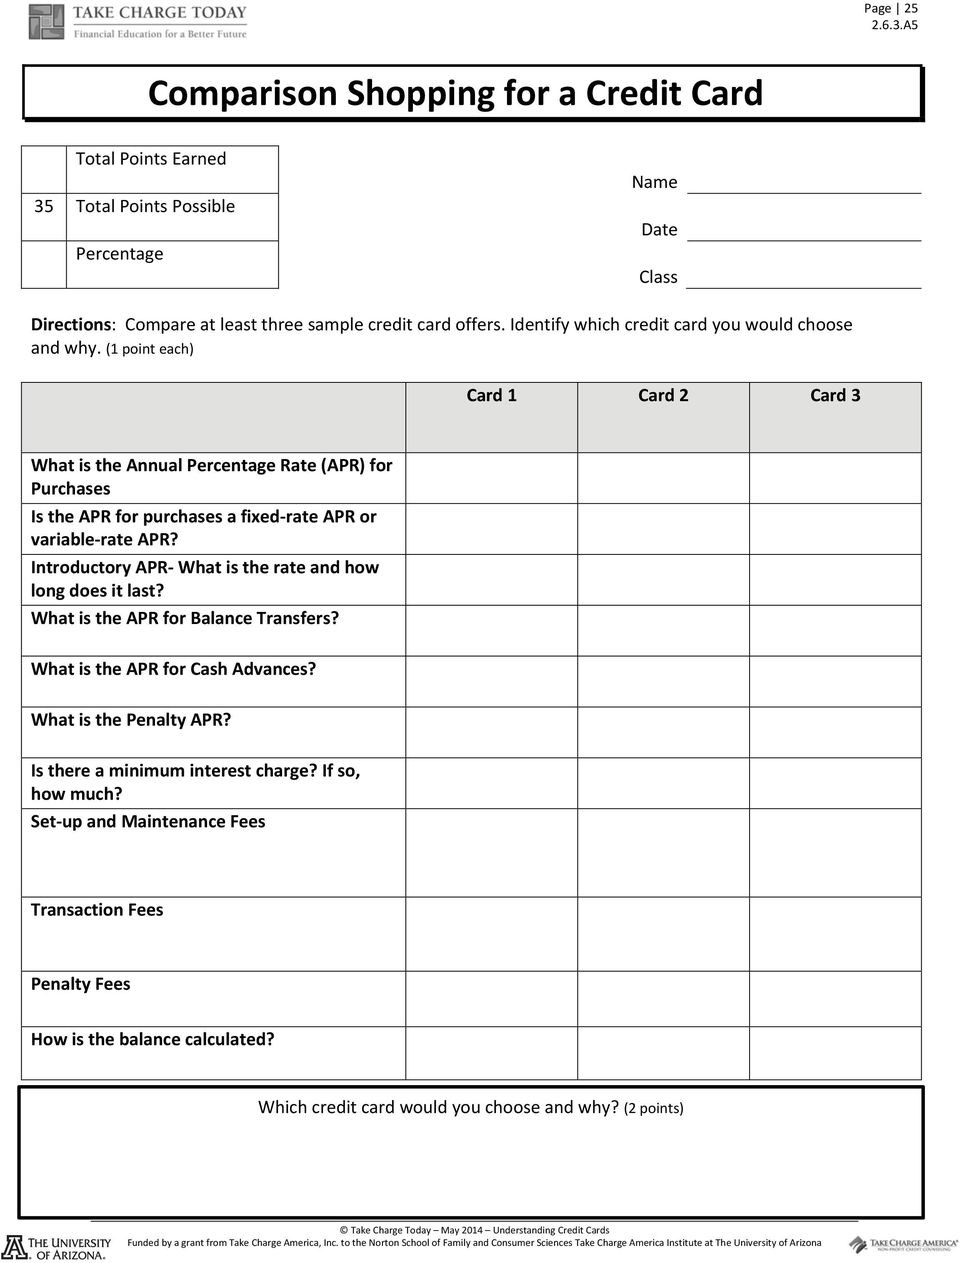 Shopping For A Credit Credit Card Comparison Worksheet With